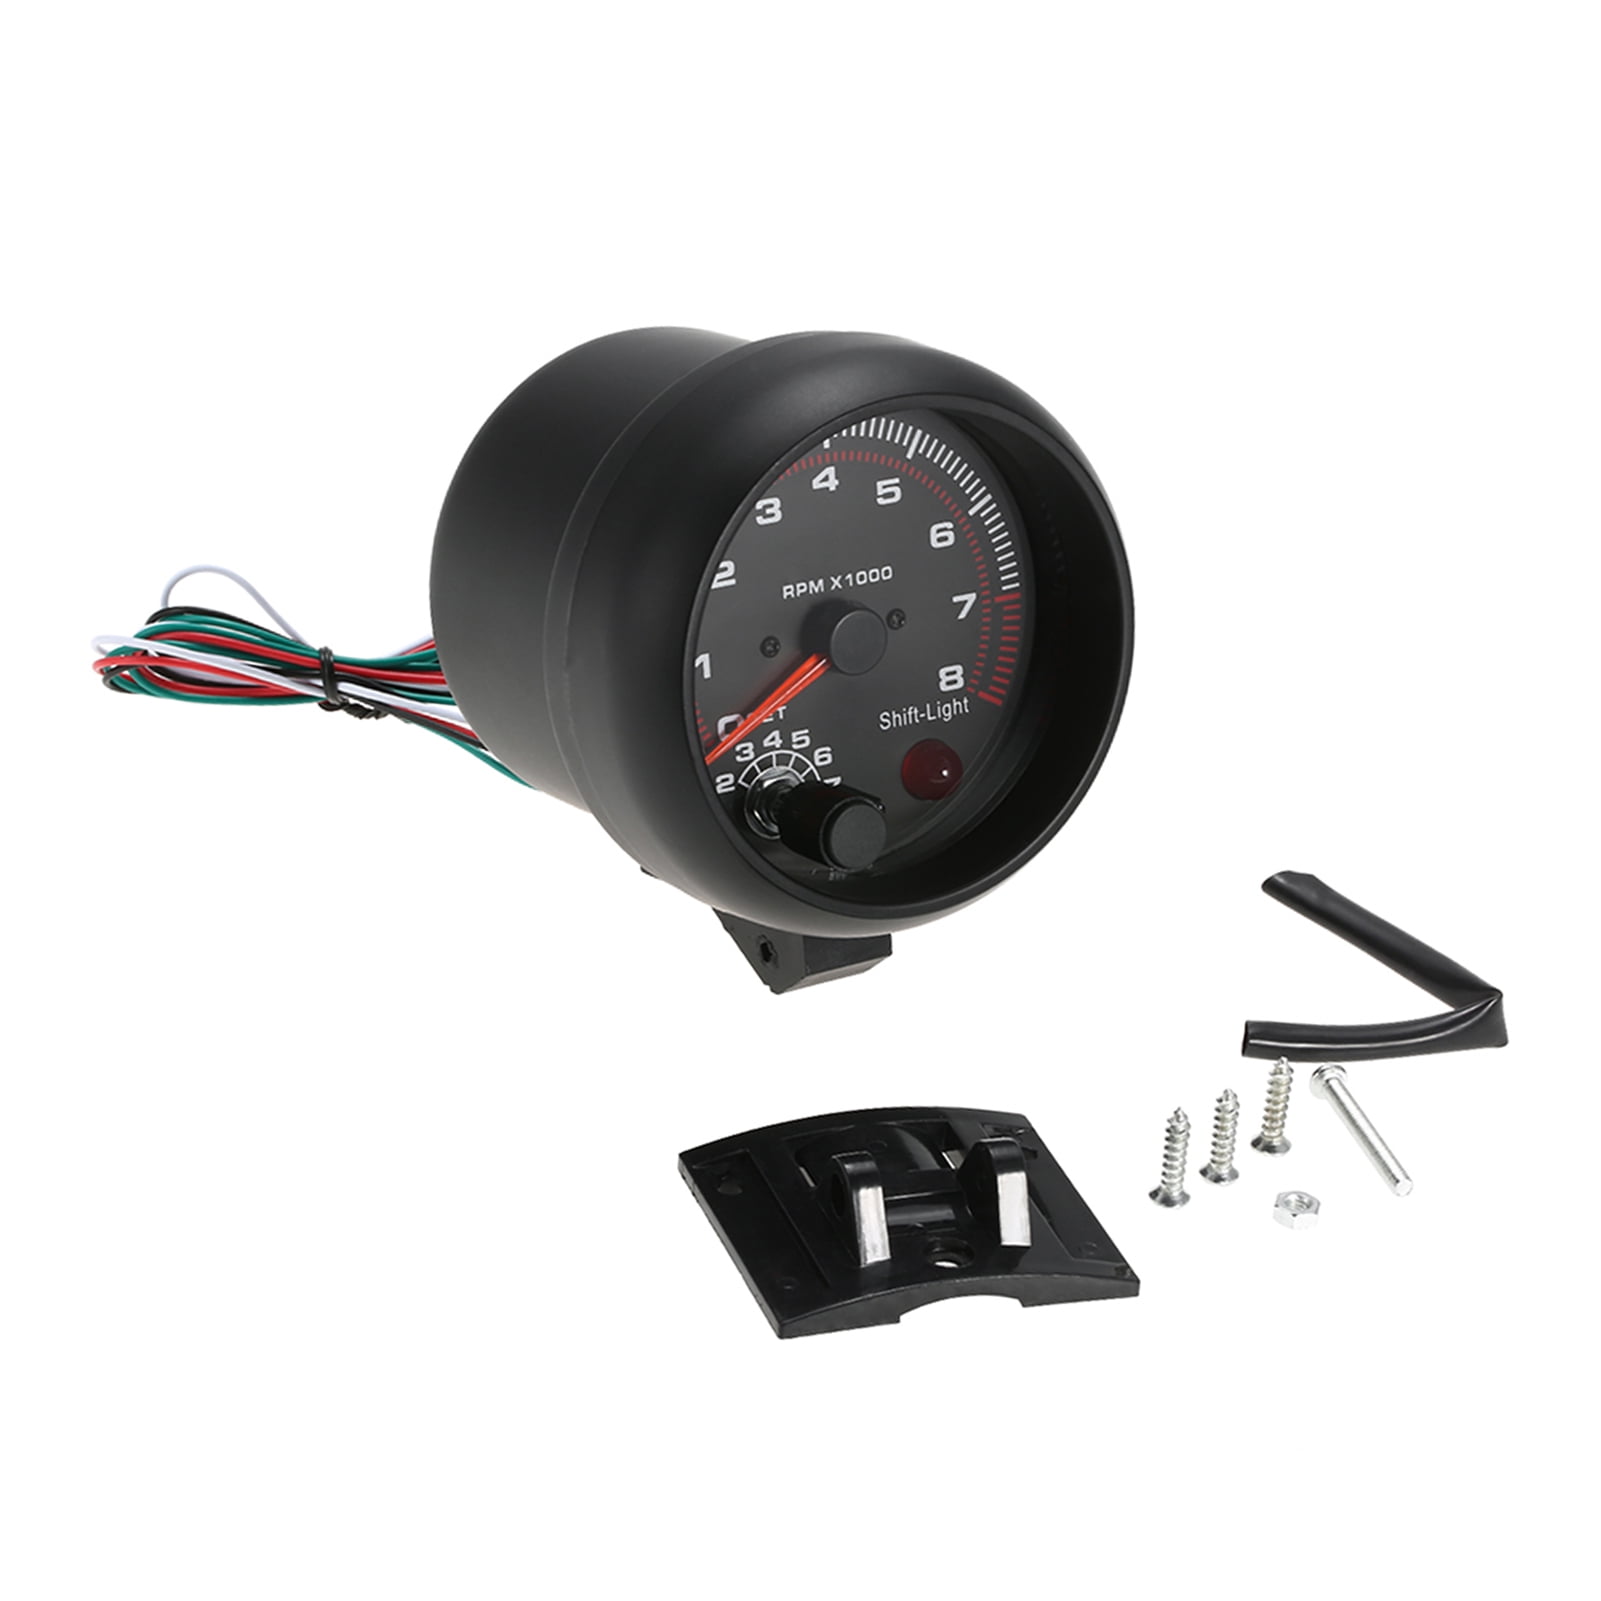 Marine Tach Hour Meter OZ-USA tachometer RPM display motorcycle atv dirtbike buggy outboard cr White 